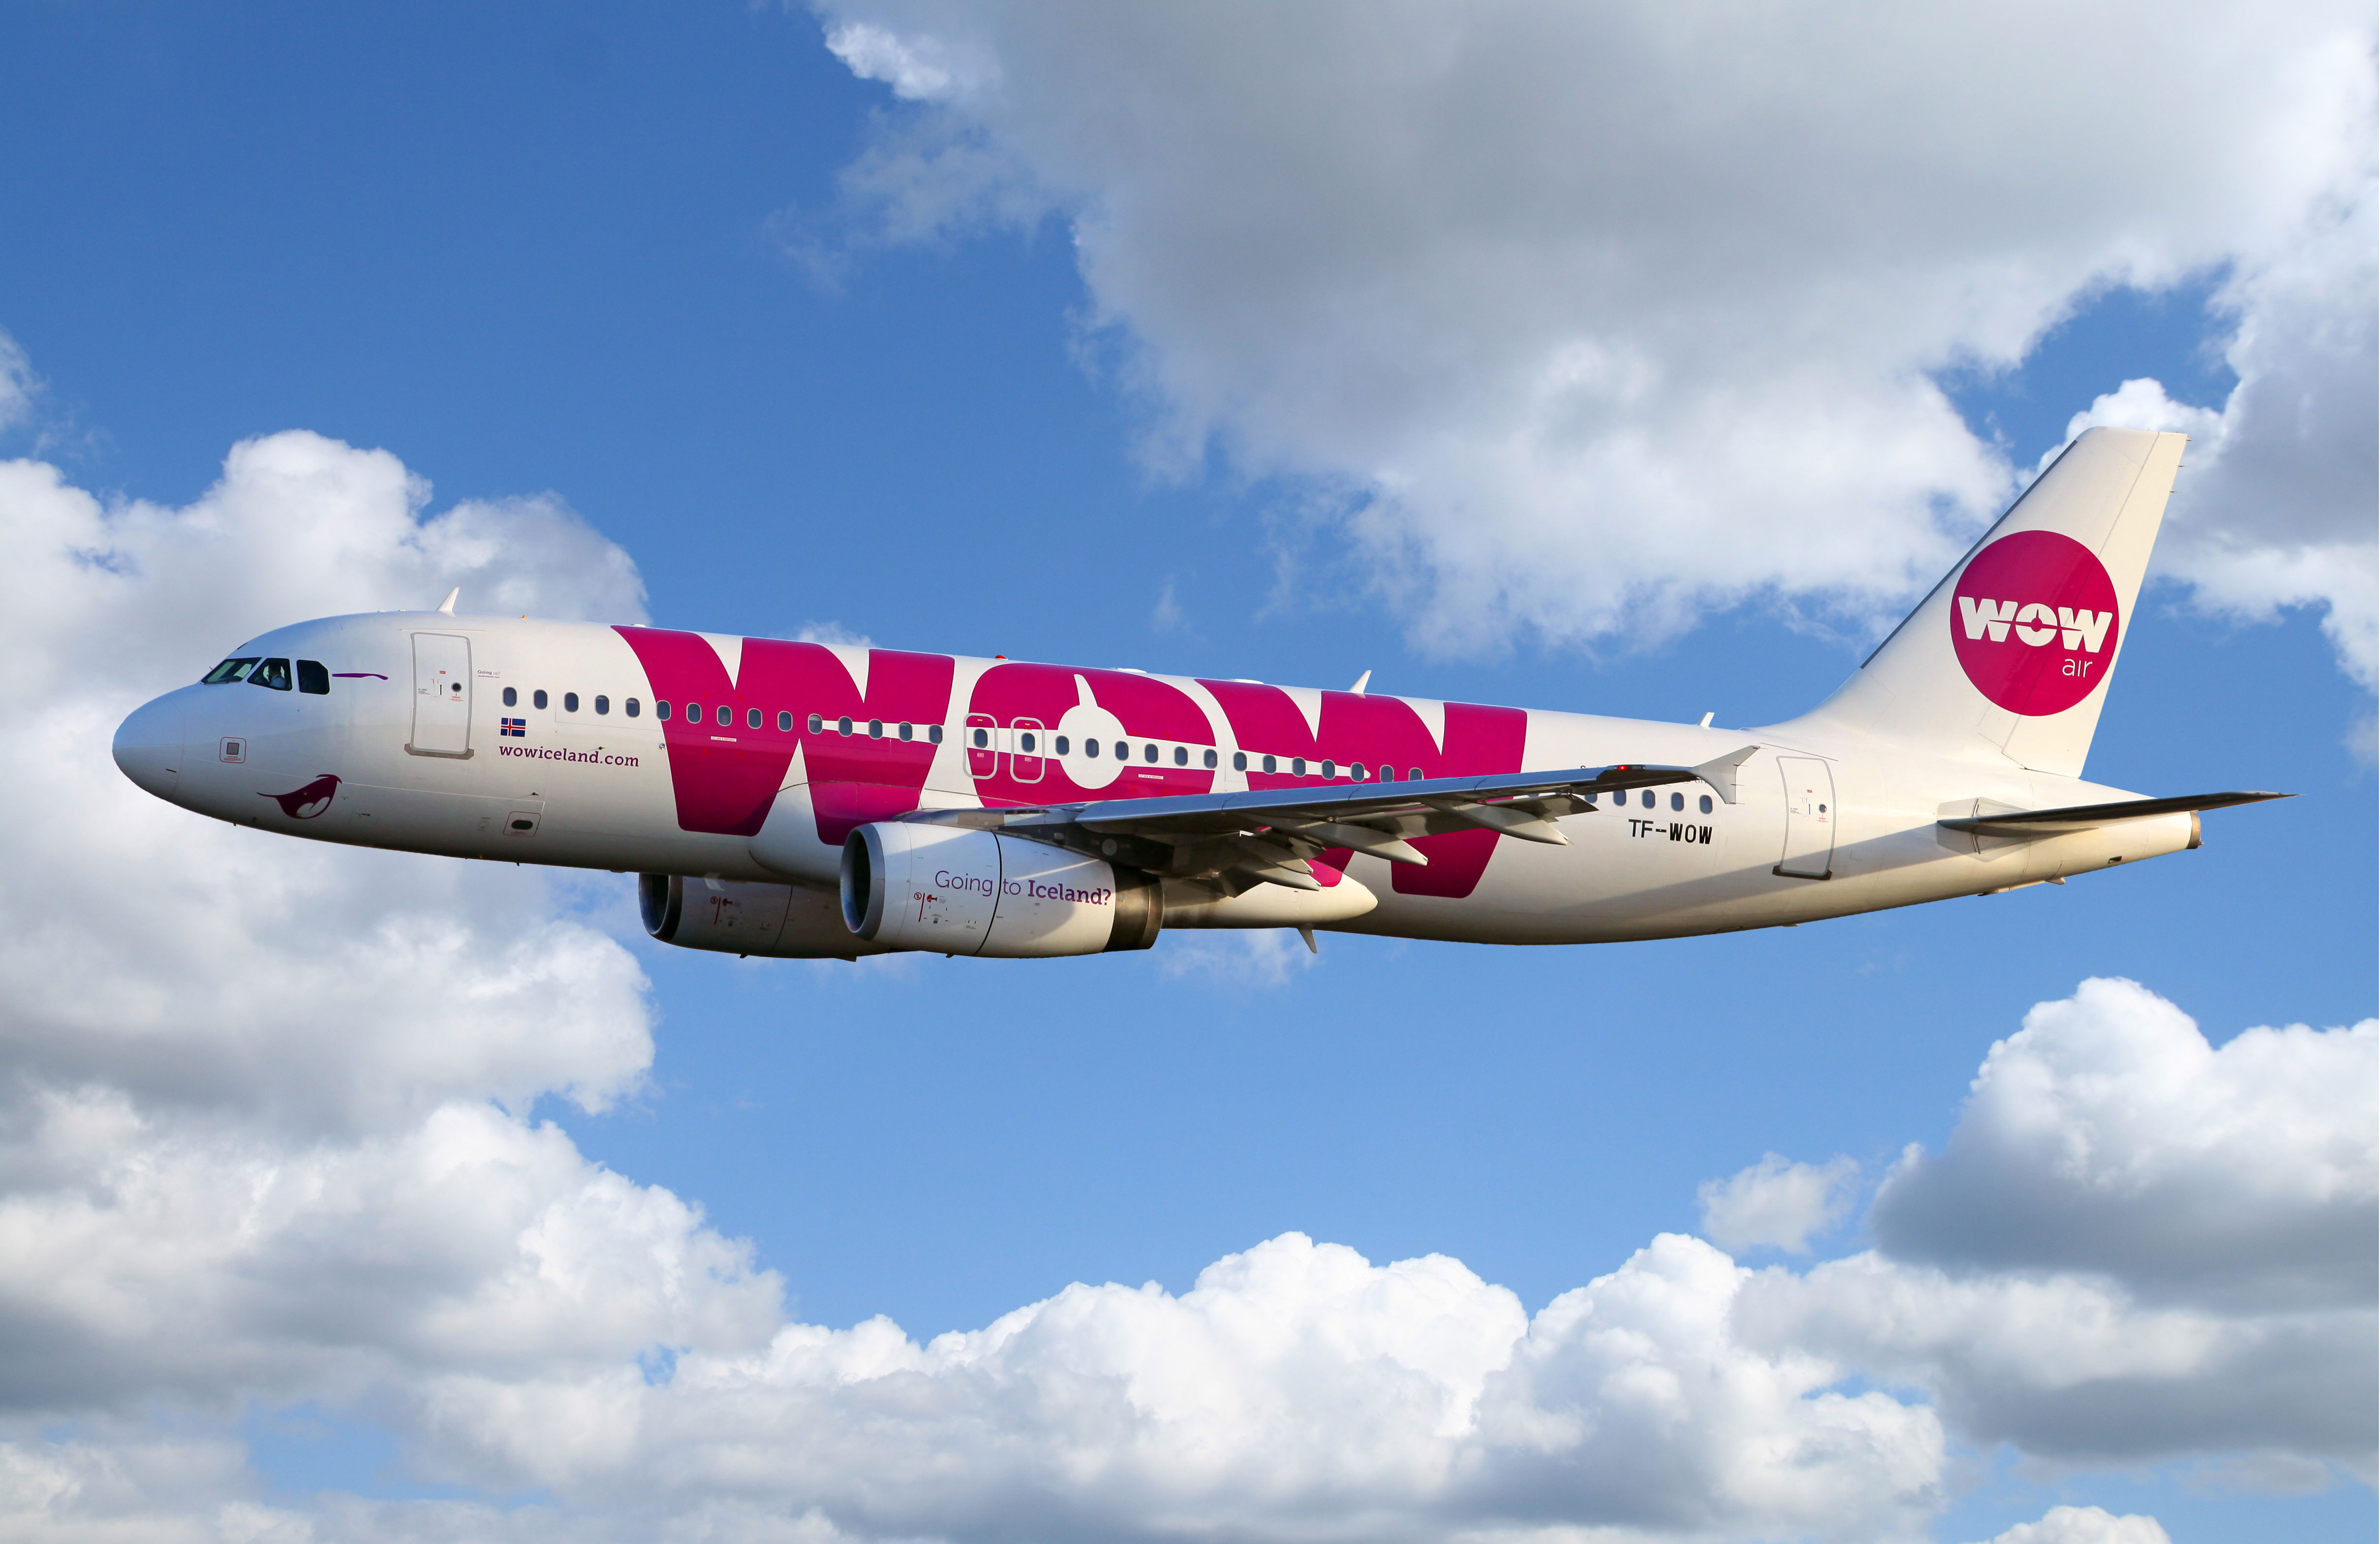 Cheap Flights to Europe: $99 Fares on Iceland's Low-Cost WOW Air | Money